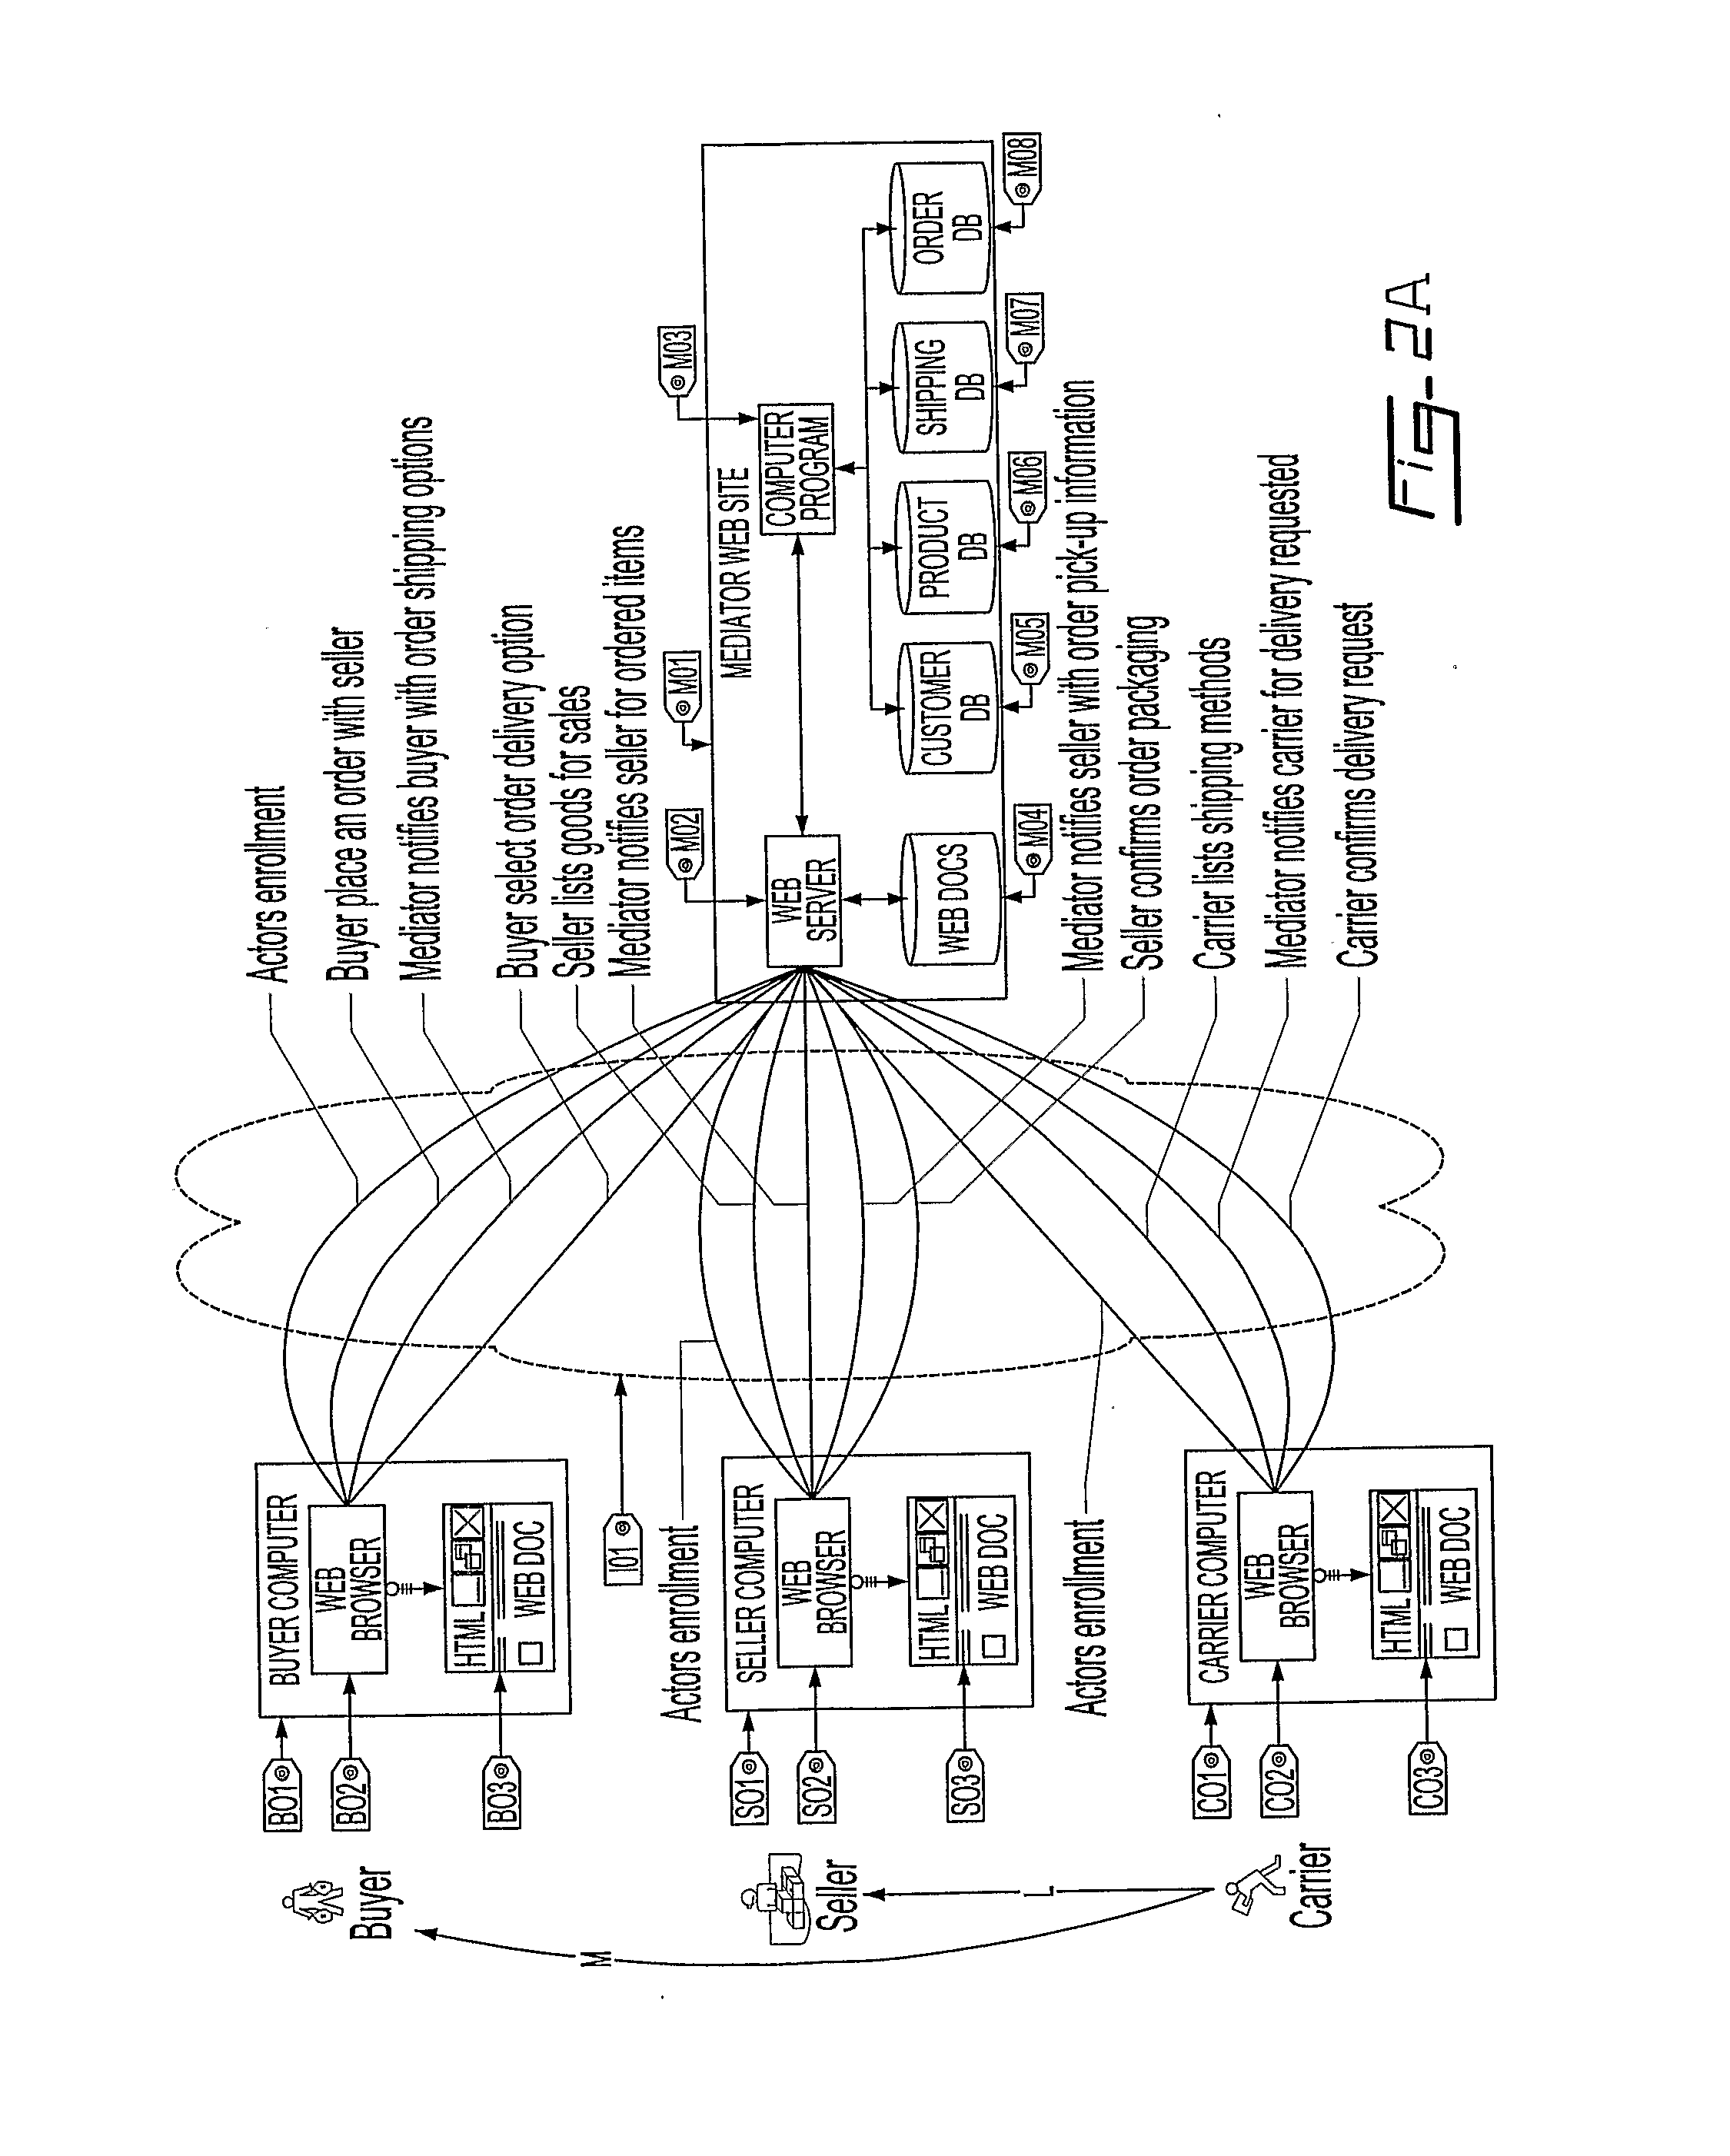 Methods and Apparatus for Selling Shipping Services Through a Mediator's Web Site